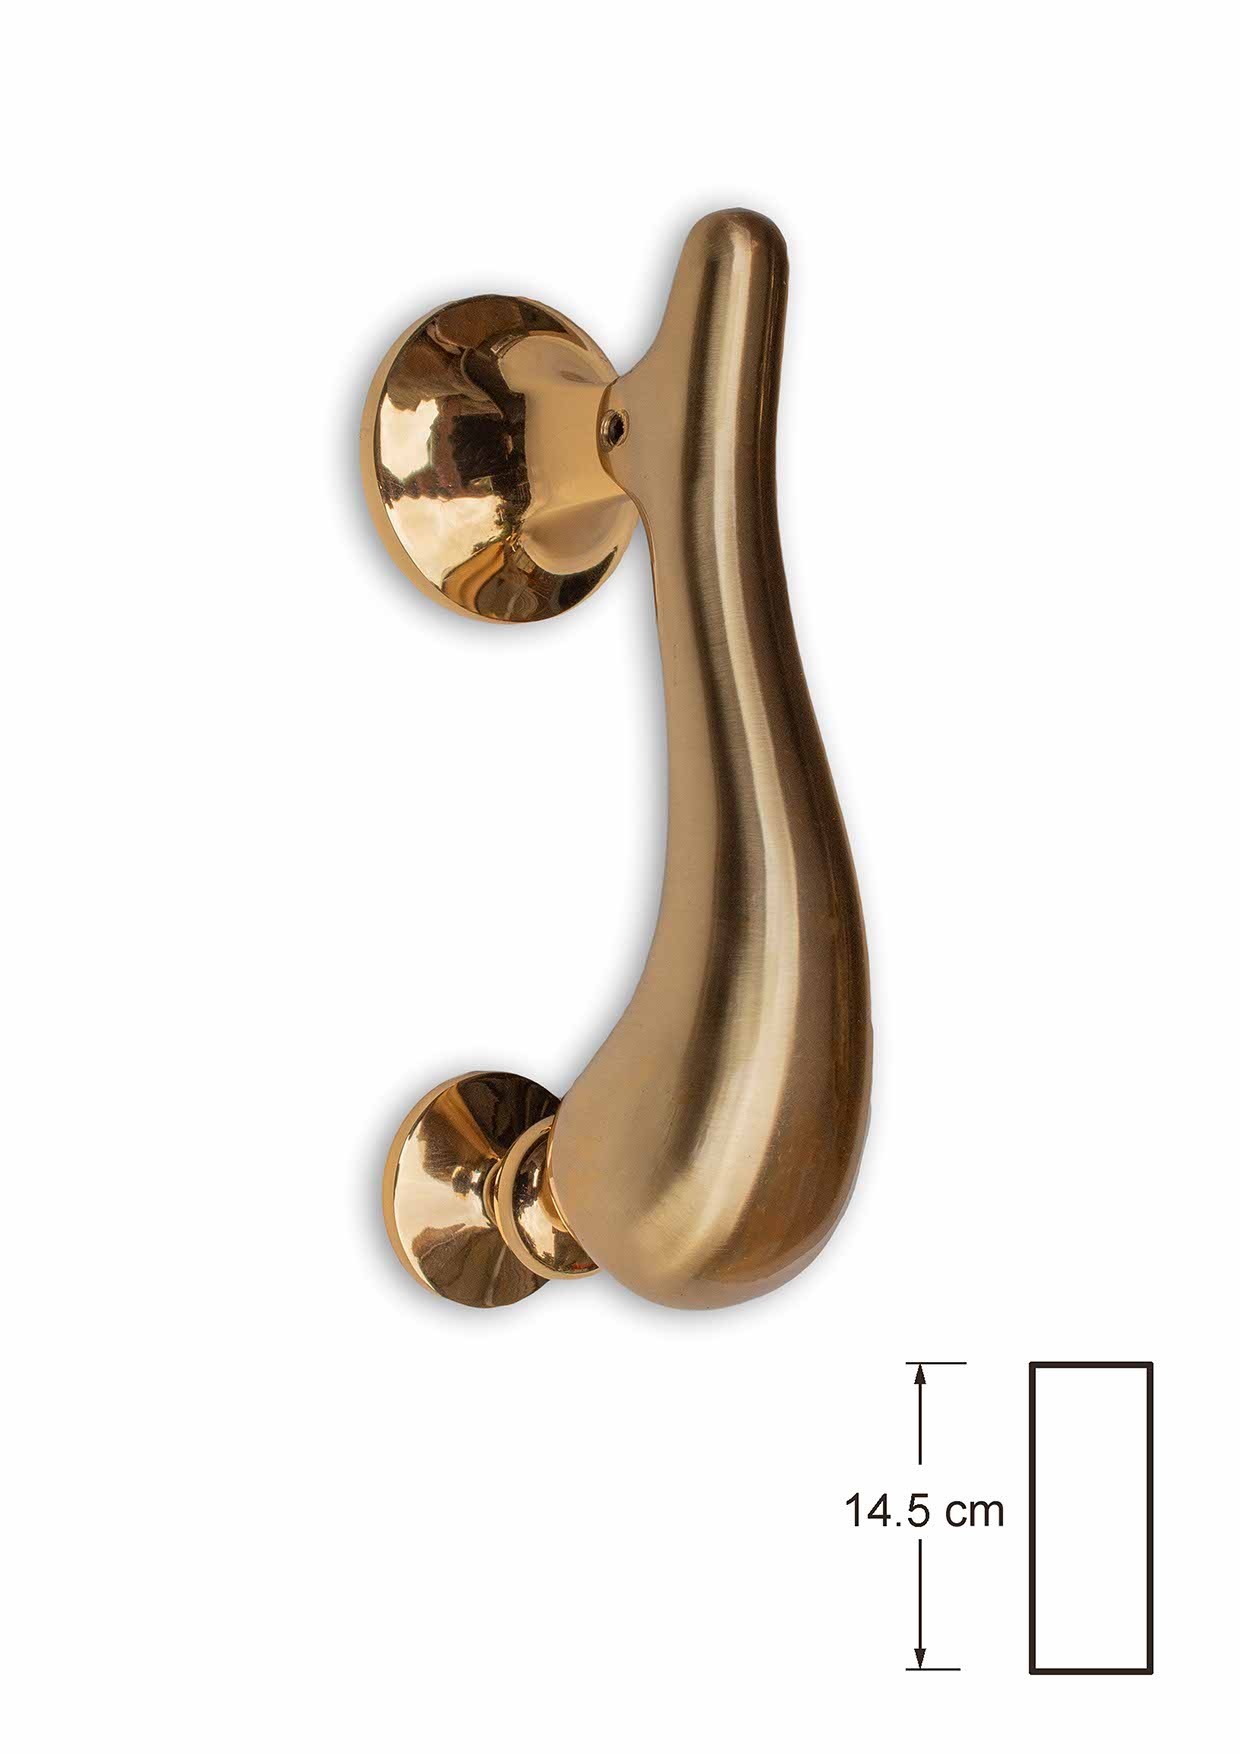 Bespoke Brass Knockers: Elegant Entryway Statement Pieces for Your Home